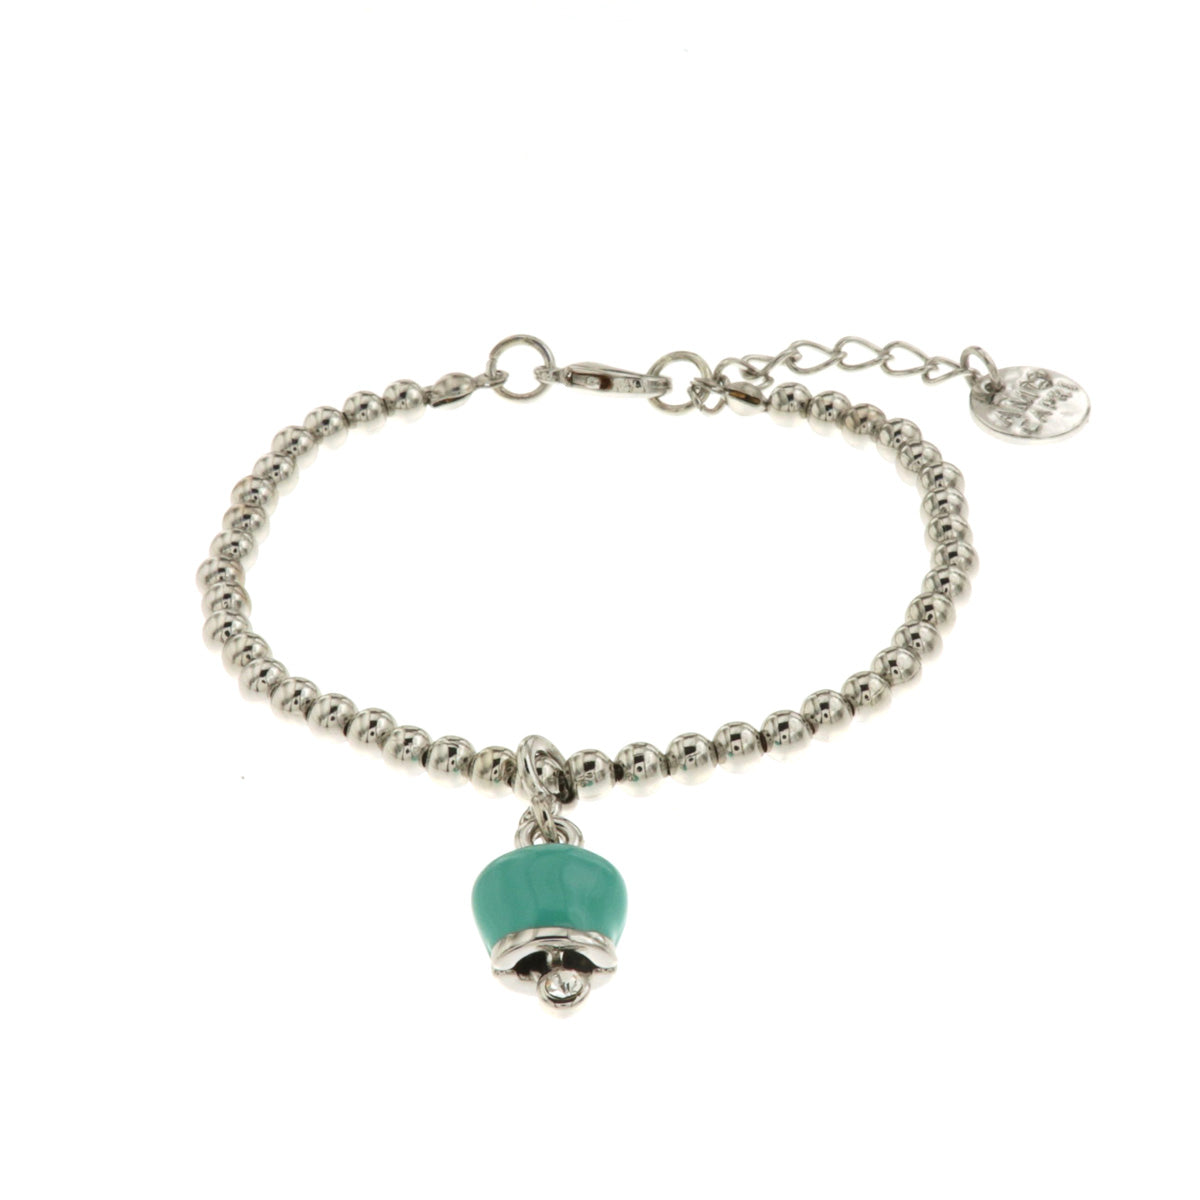 Metal bracelet ball jersey with borne charming of the green pendant water embellished with crystals